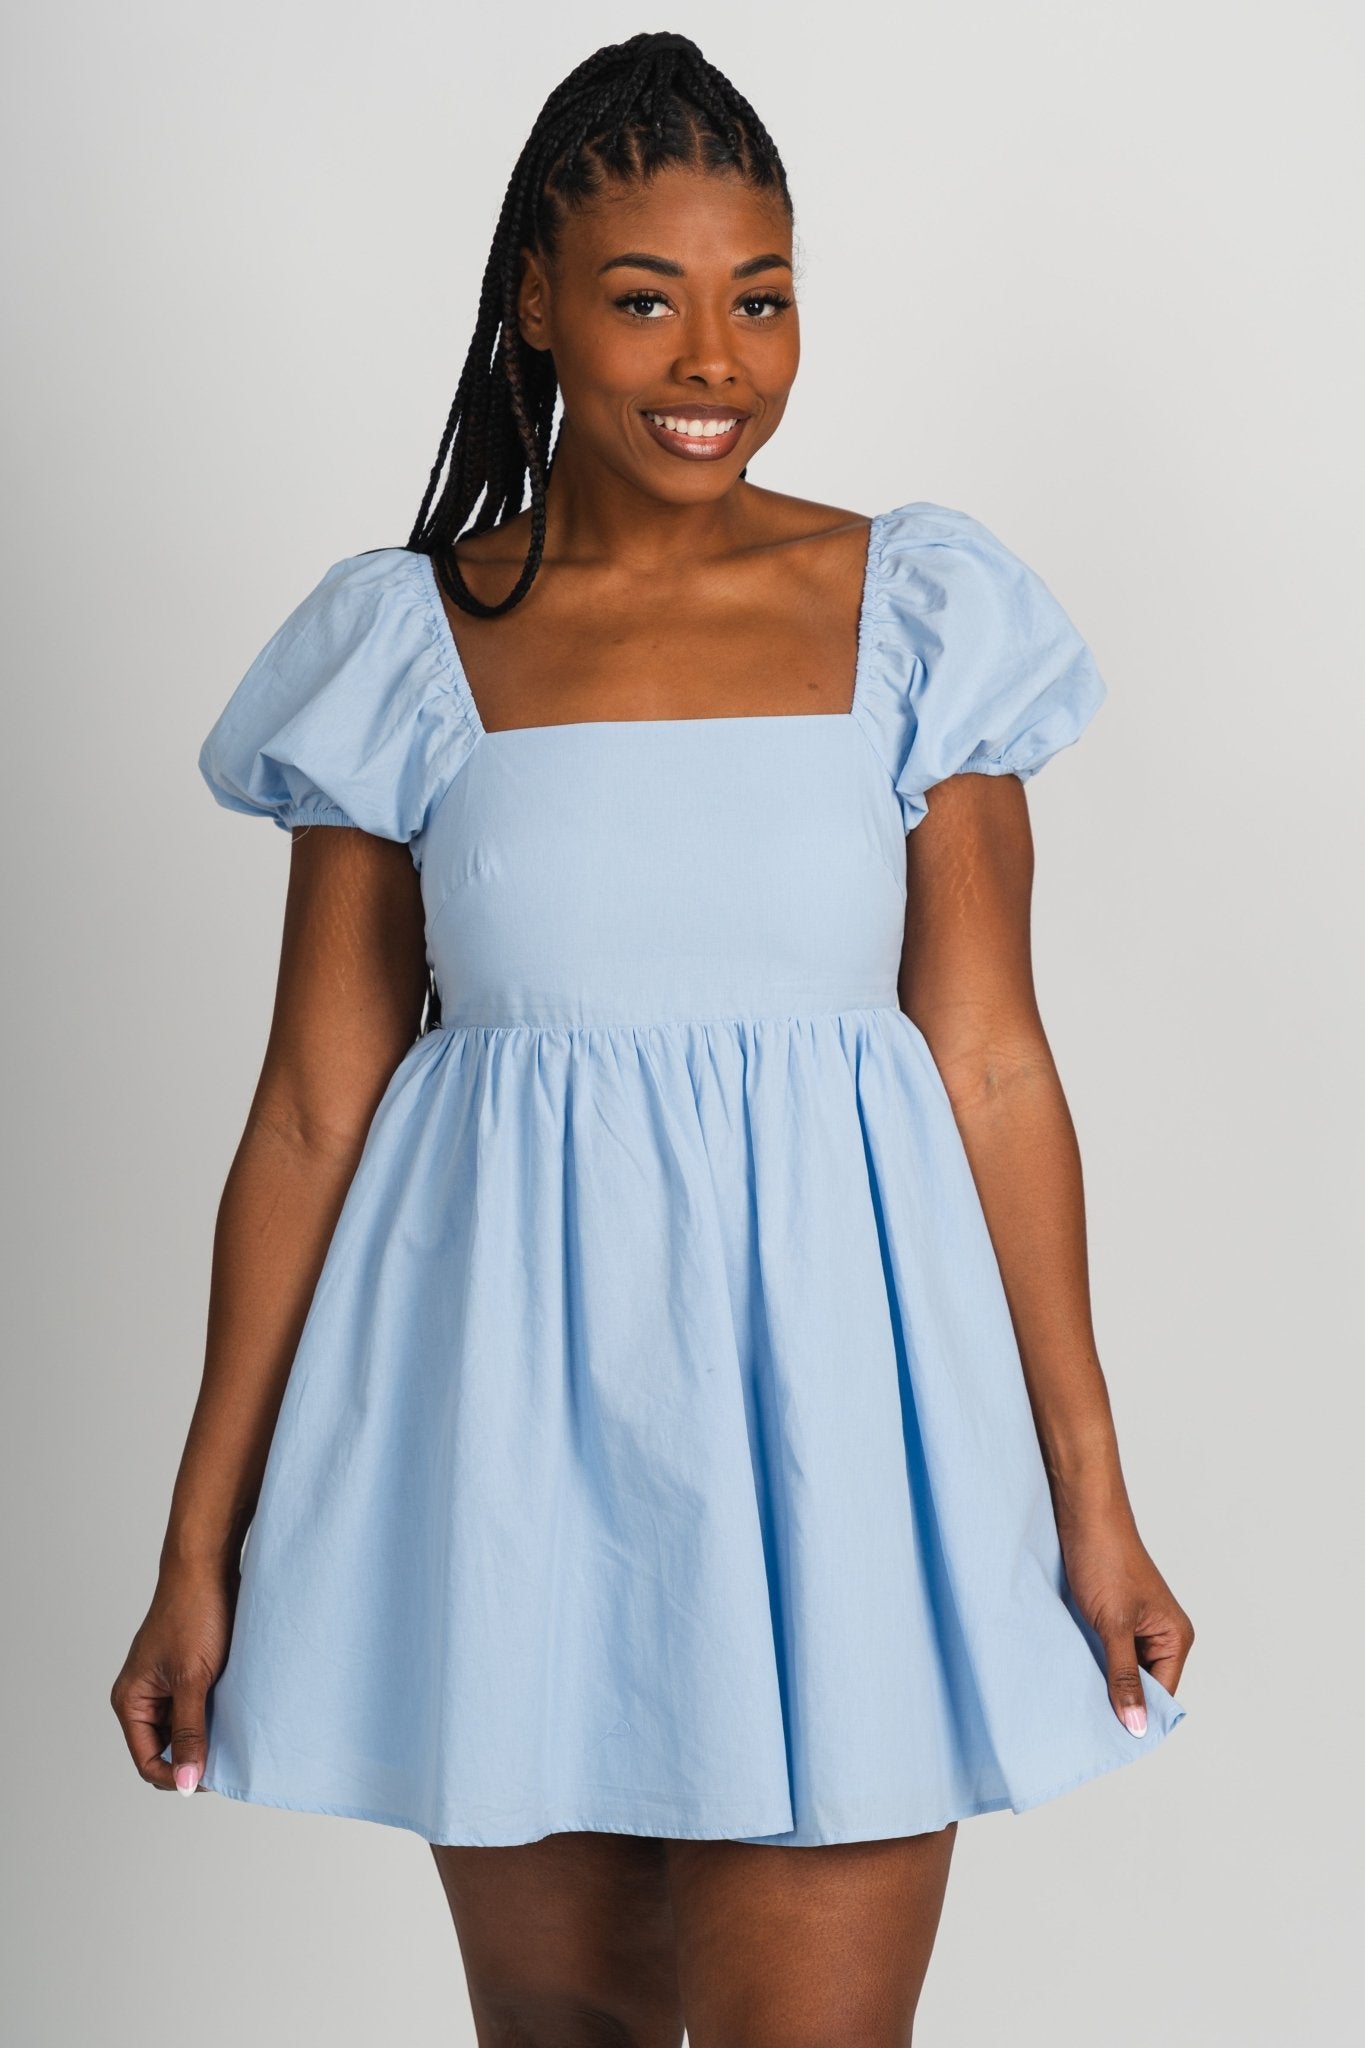 Puff sleeve babydoll dress light blue - Affordable dress - Boutique Dresses at Lush Fashion Lounge Boutique in Oklahoma City